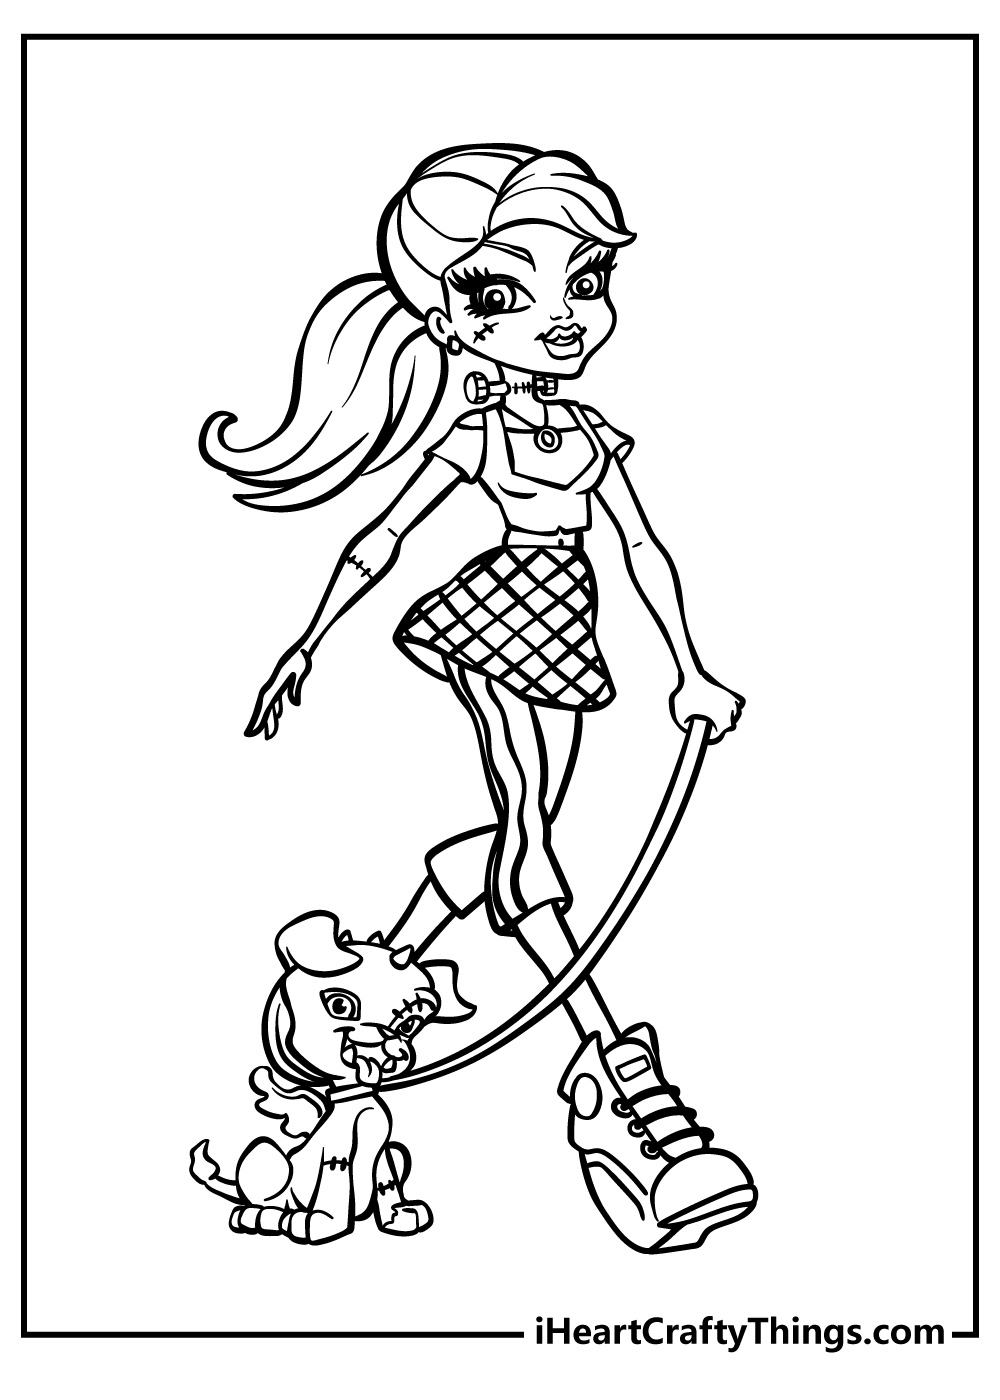 Monster High Coloring Book for adults free download